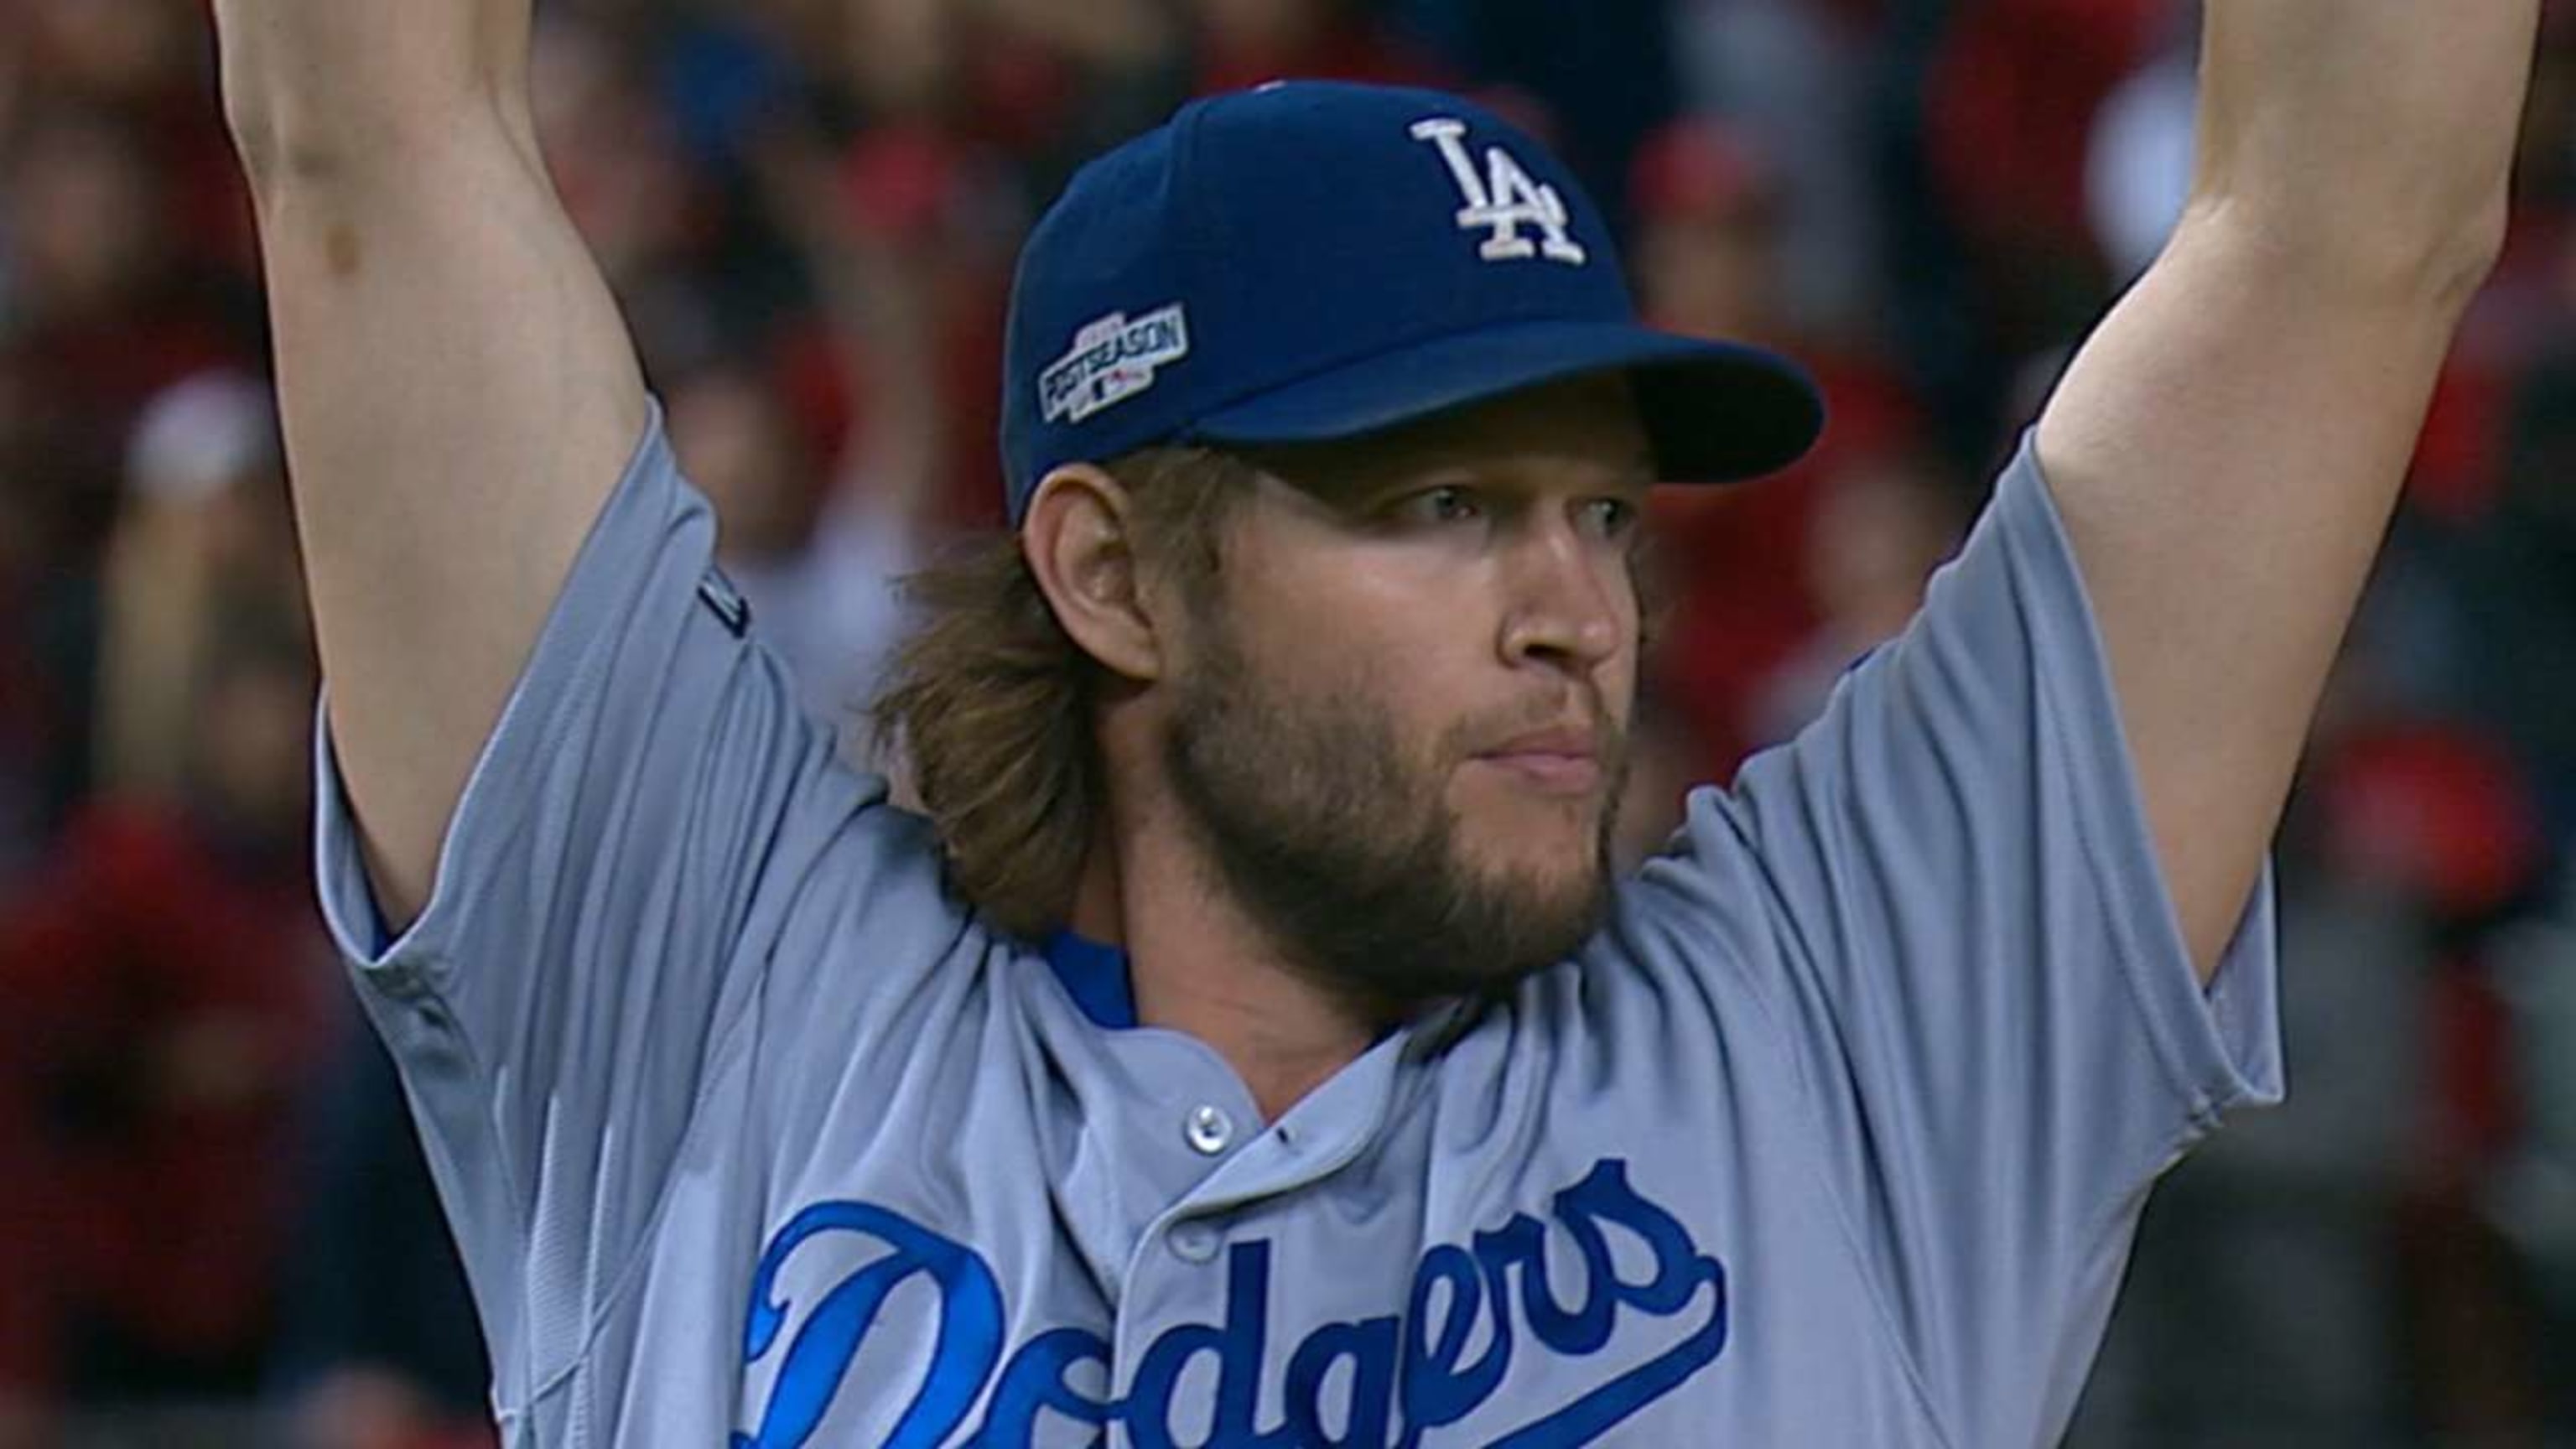 Clayton Kershaw history: His lone start against the Rangers, in